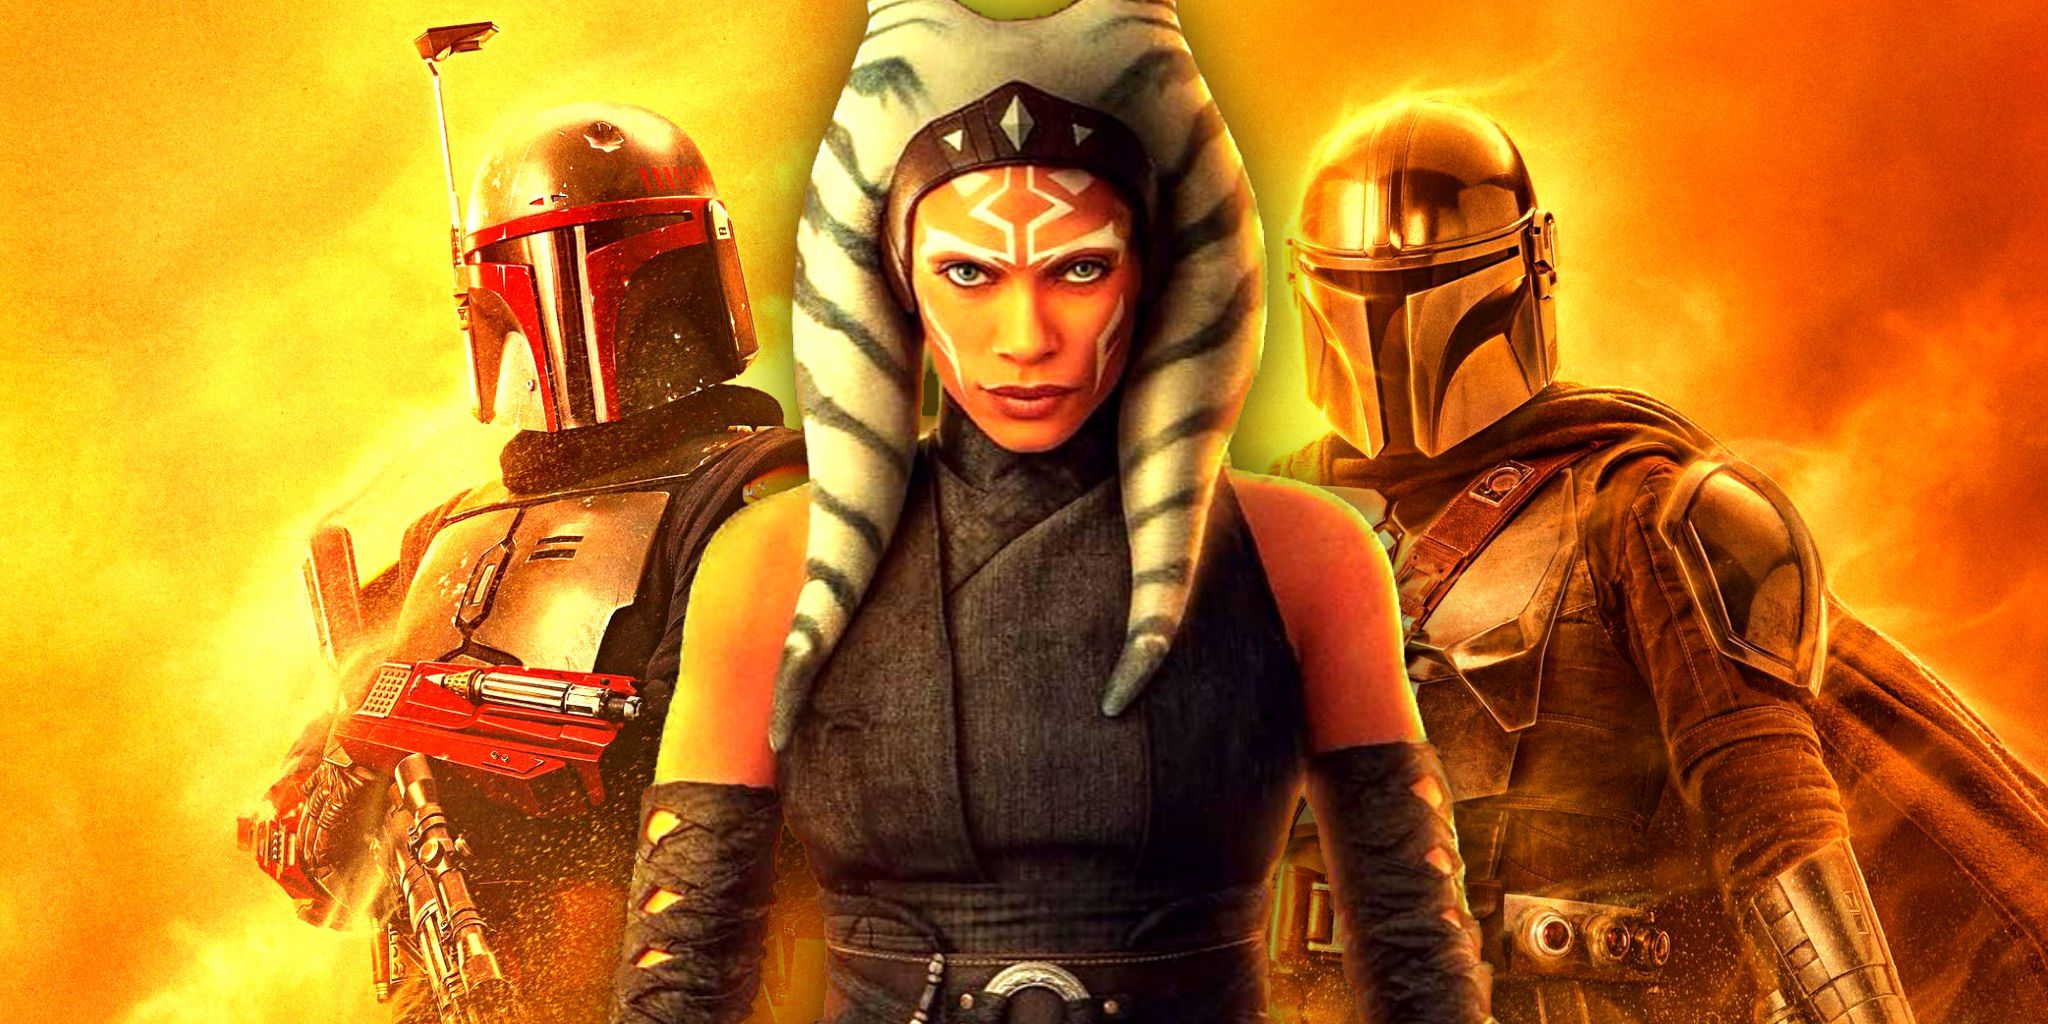 Ahsoka's Mandalorian season 2 poster stands in the foreground, with Boba Fett and Din Djarin standing in the background.